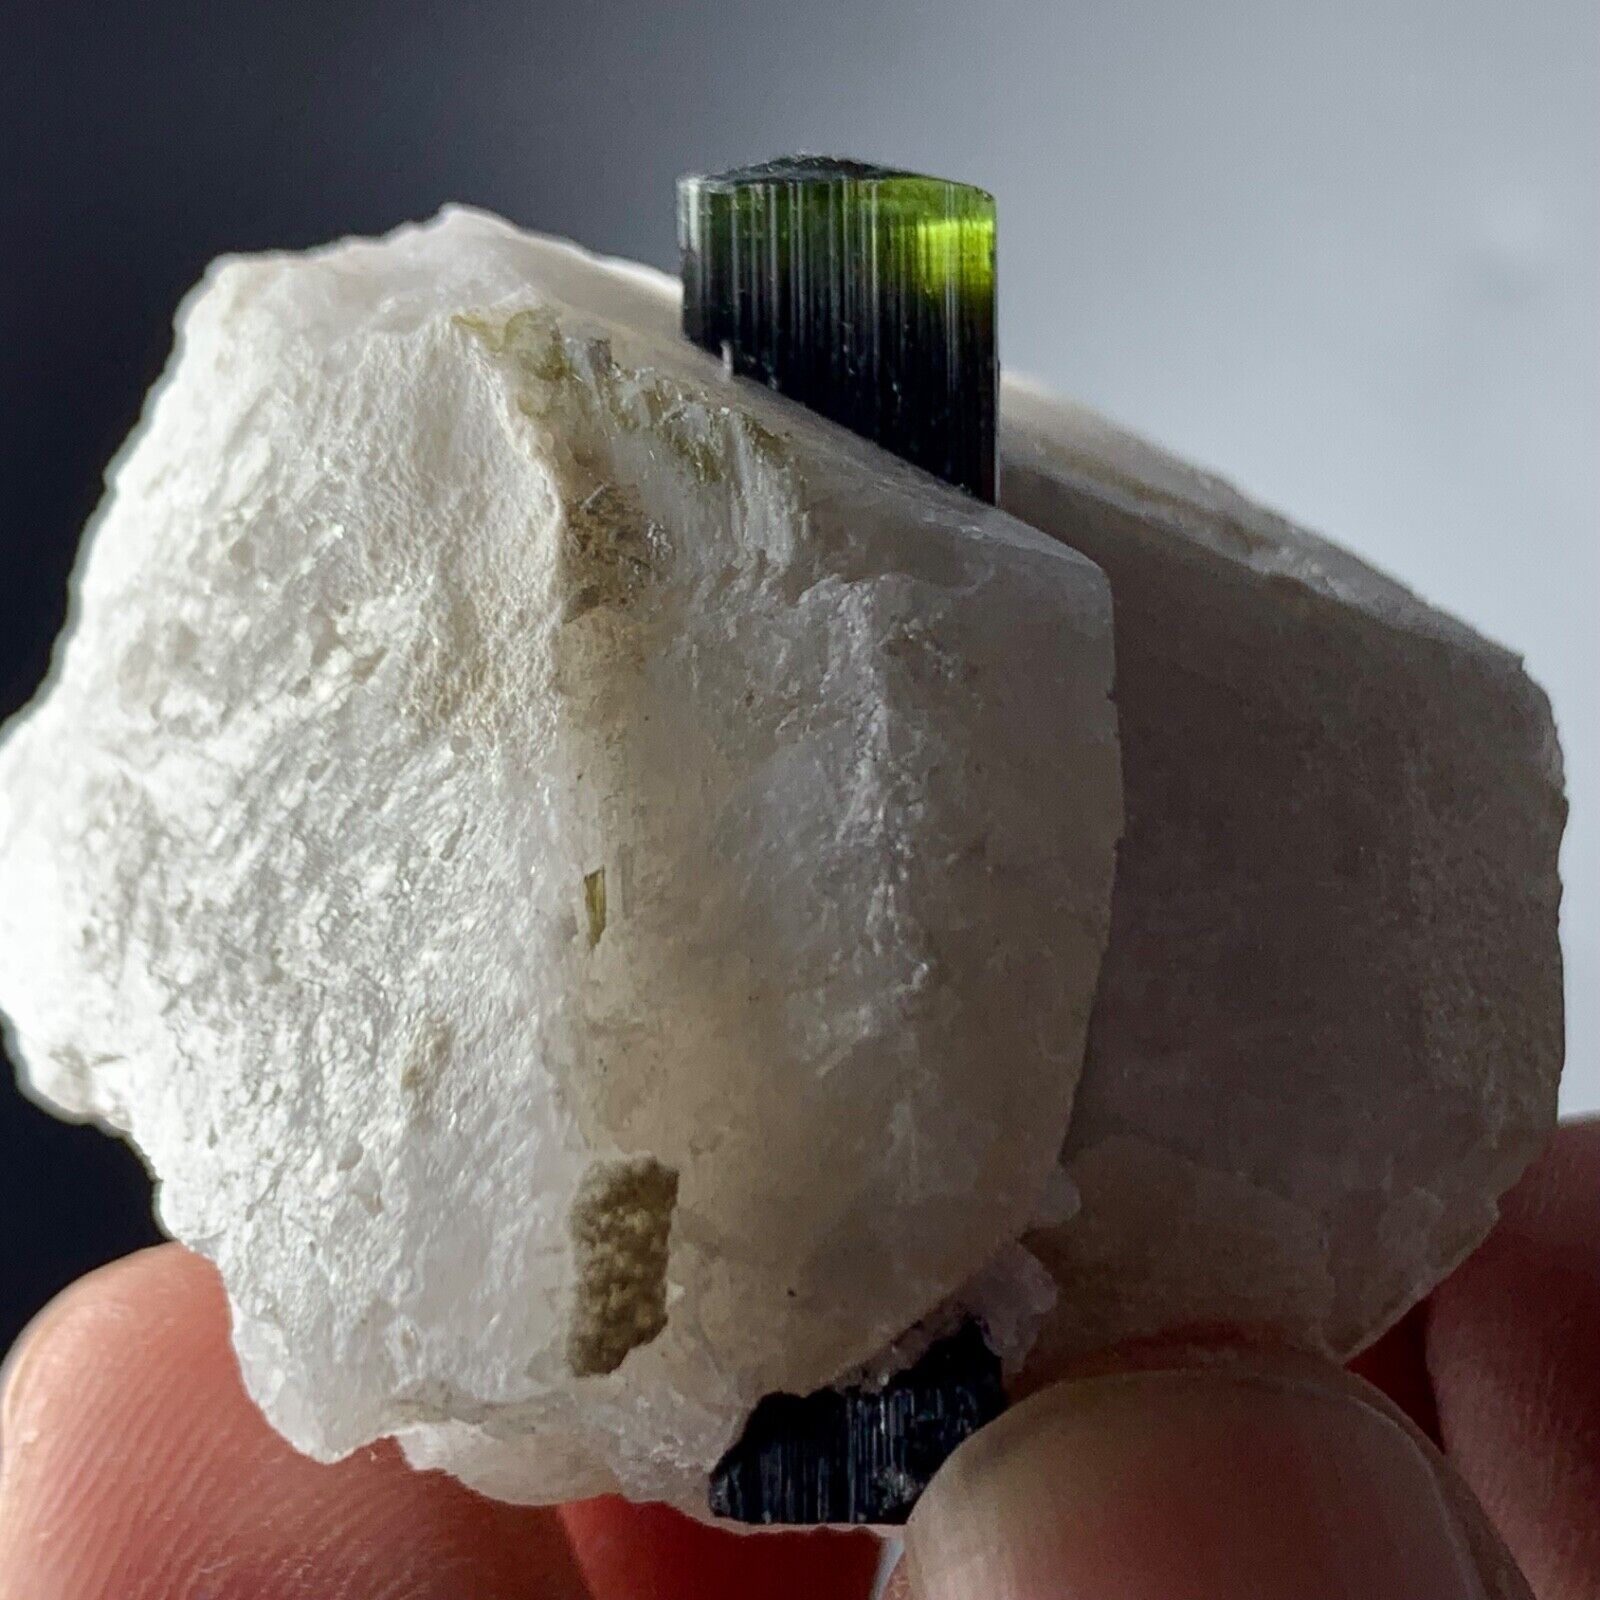 245 Cts Green cap Tourmaline Crystal with feldspars From Pakistan